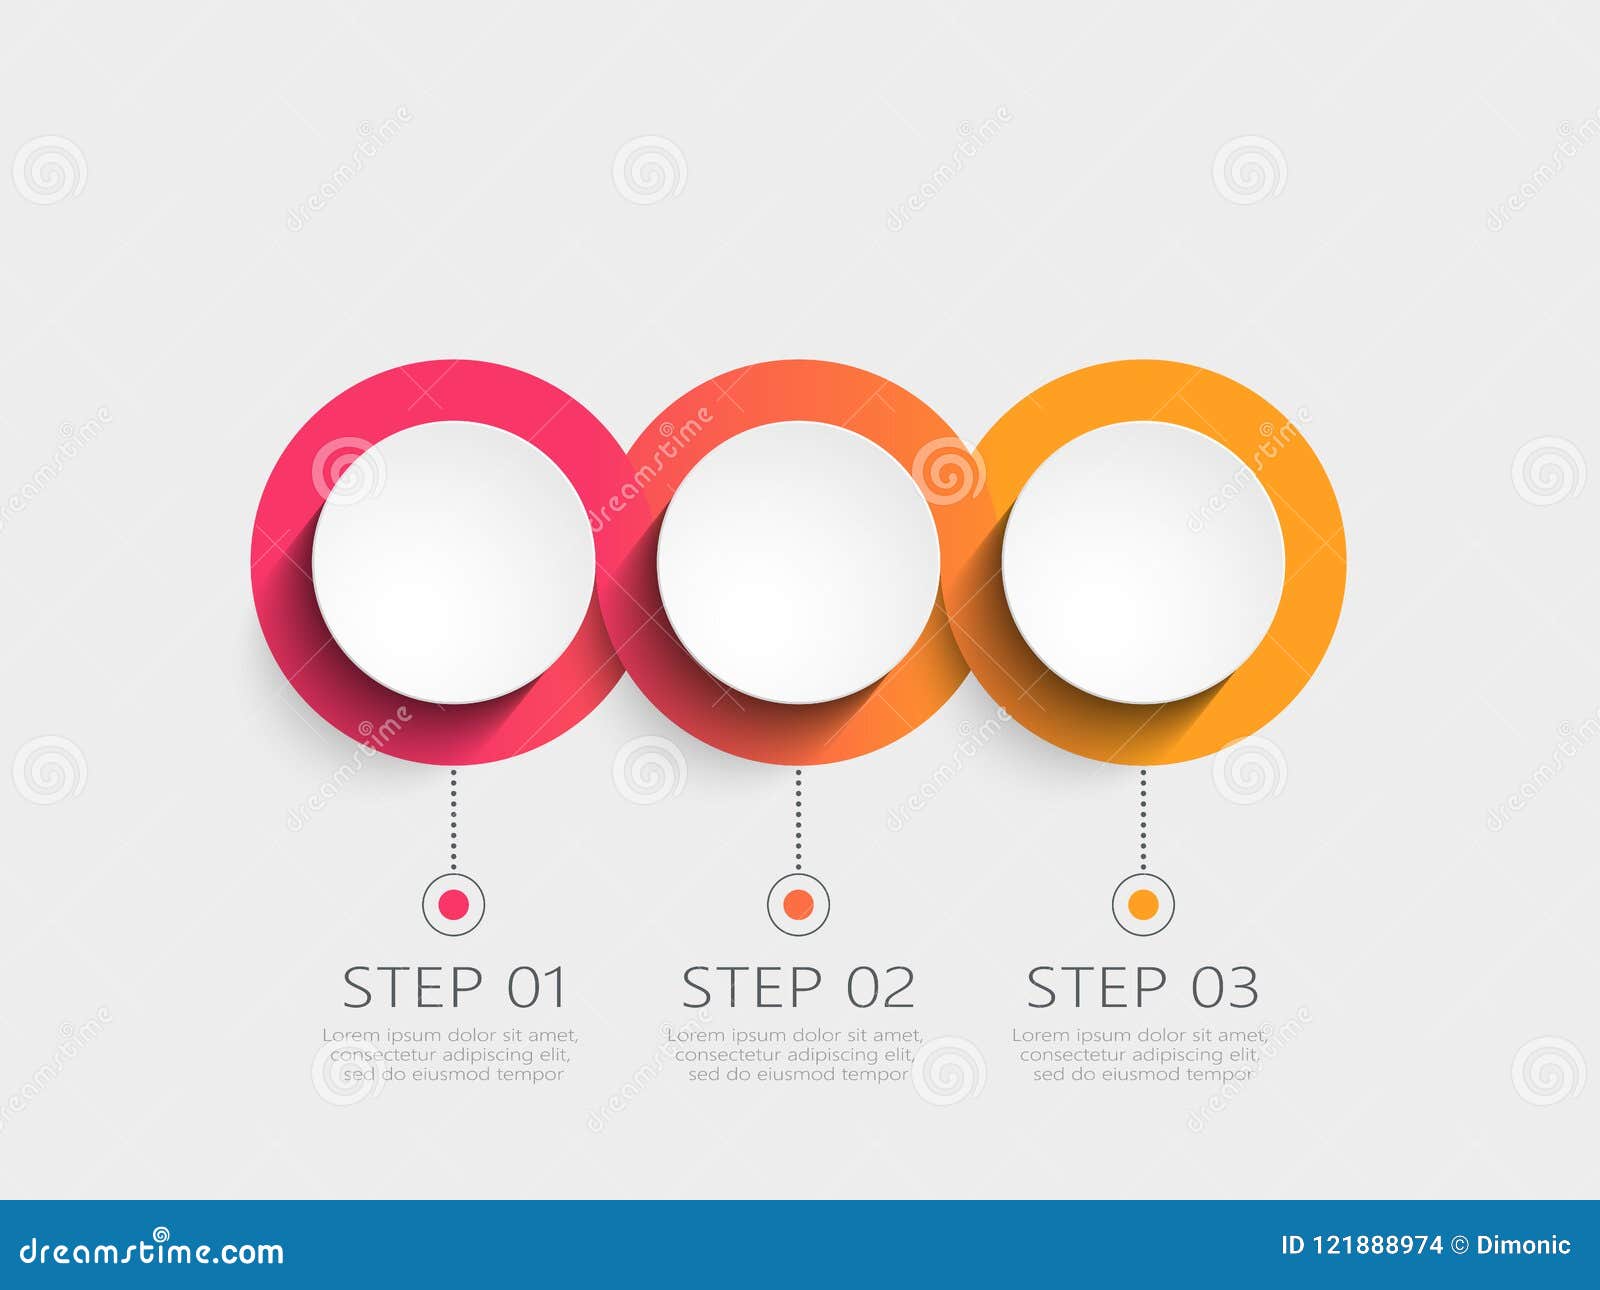 Modern 3D Infographic Template with 3 Steps. Business Circle Template ...